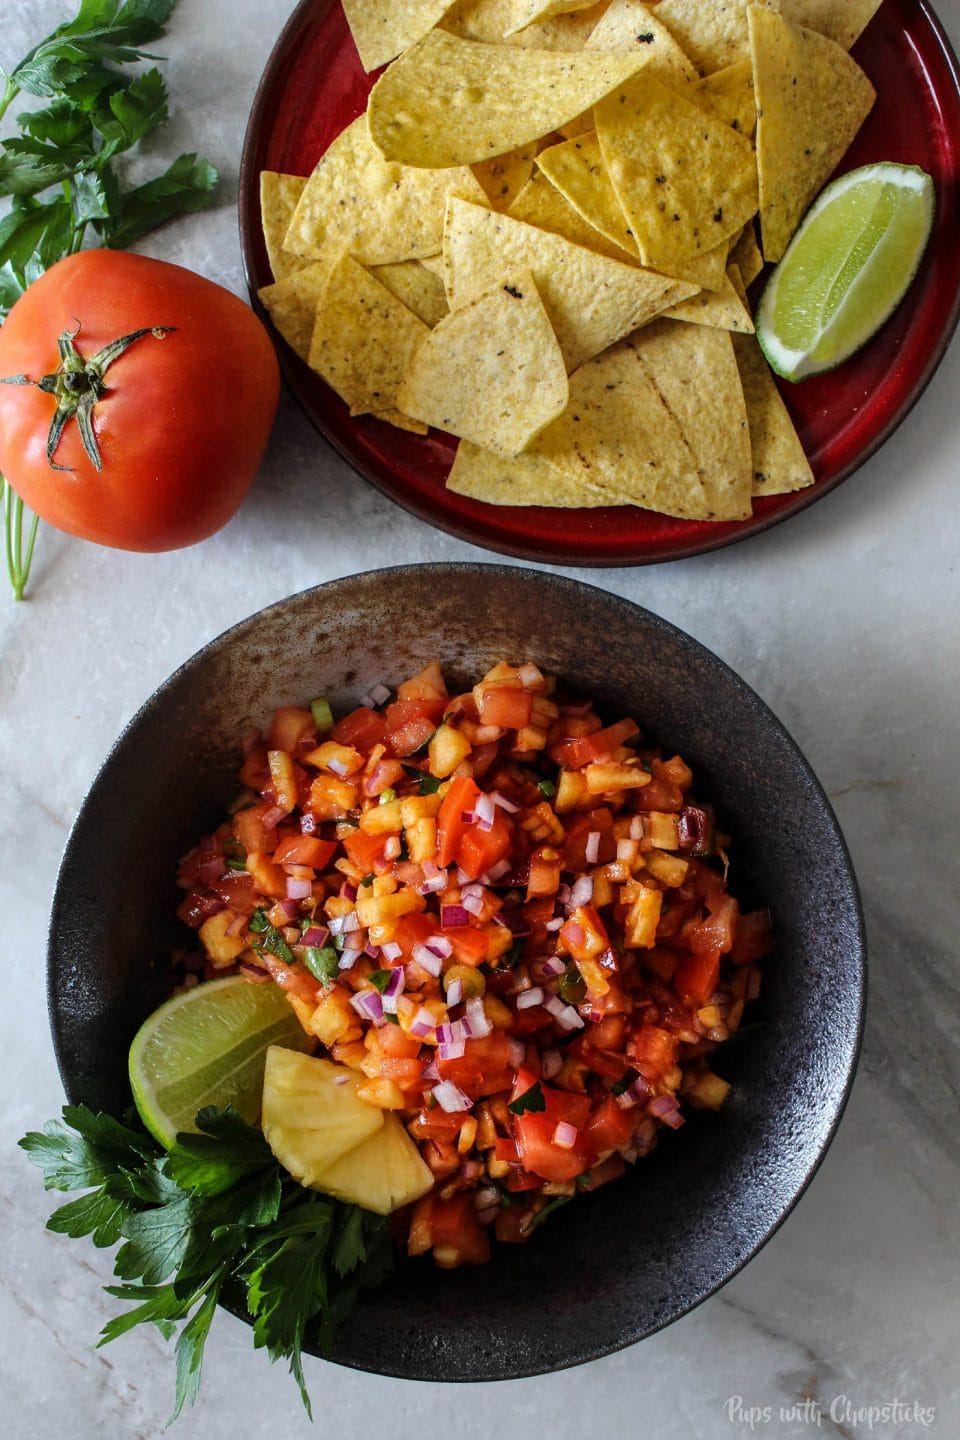 A bowl of pineapple salsa served with a side of tortilla chips